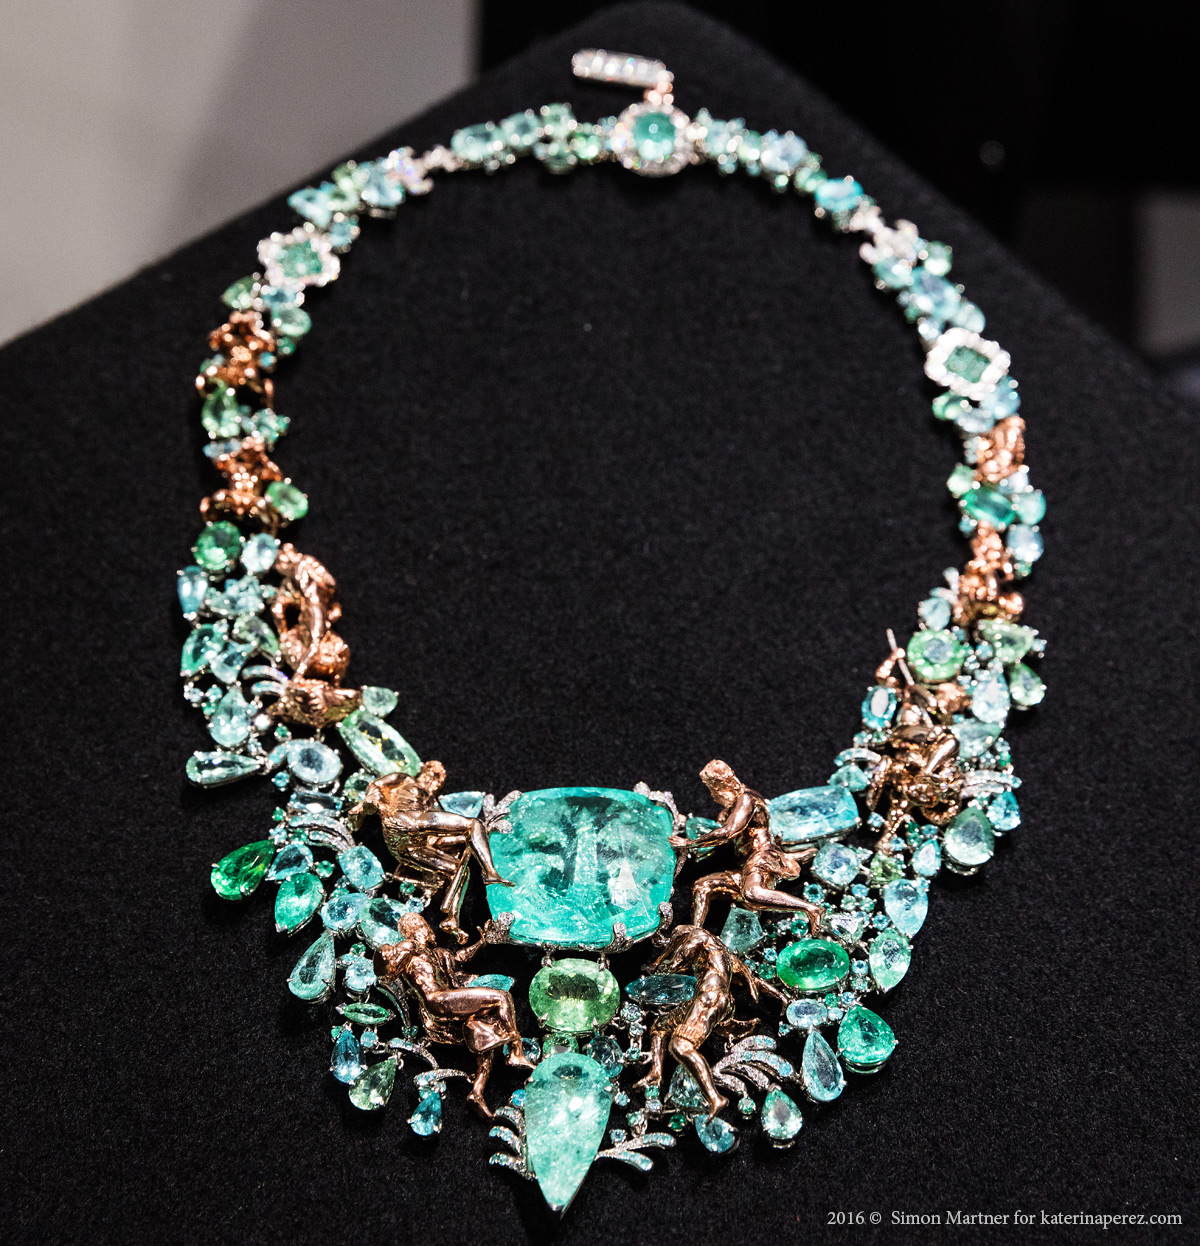 Bib-necklace, designed to be worn on the upper part of the chest rising right up to your neck, decorated with a view of the Fontana dei Quattro Fiumi in Piazza Navona